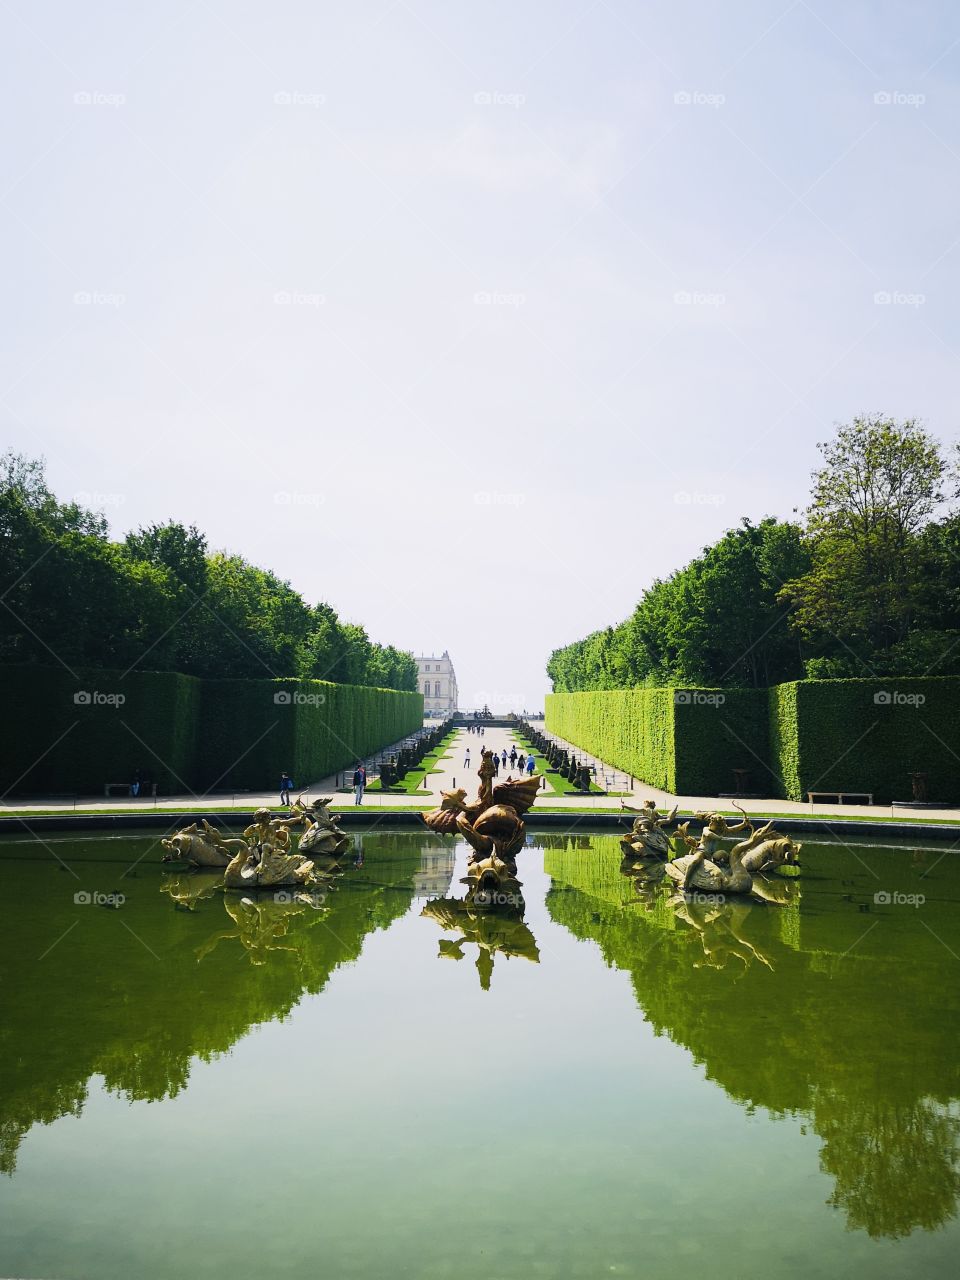 The garden of the Palace of Versailles on the reflection of the lake